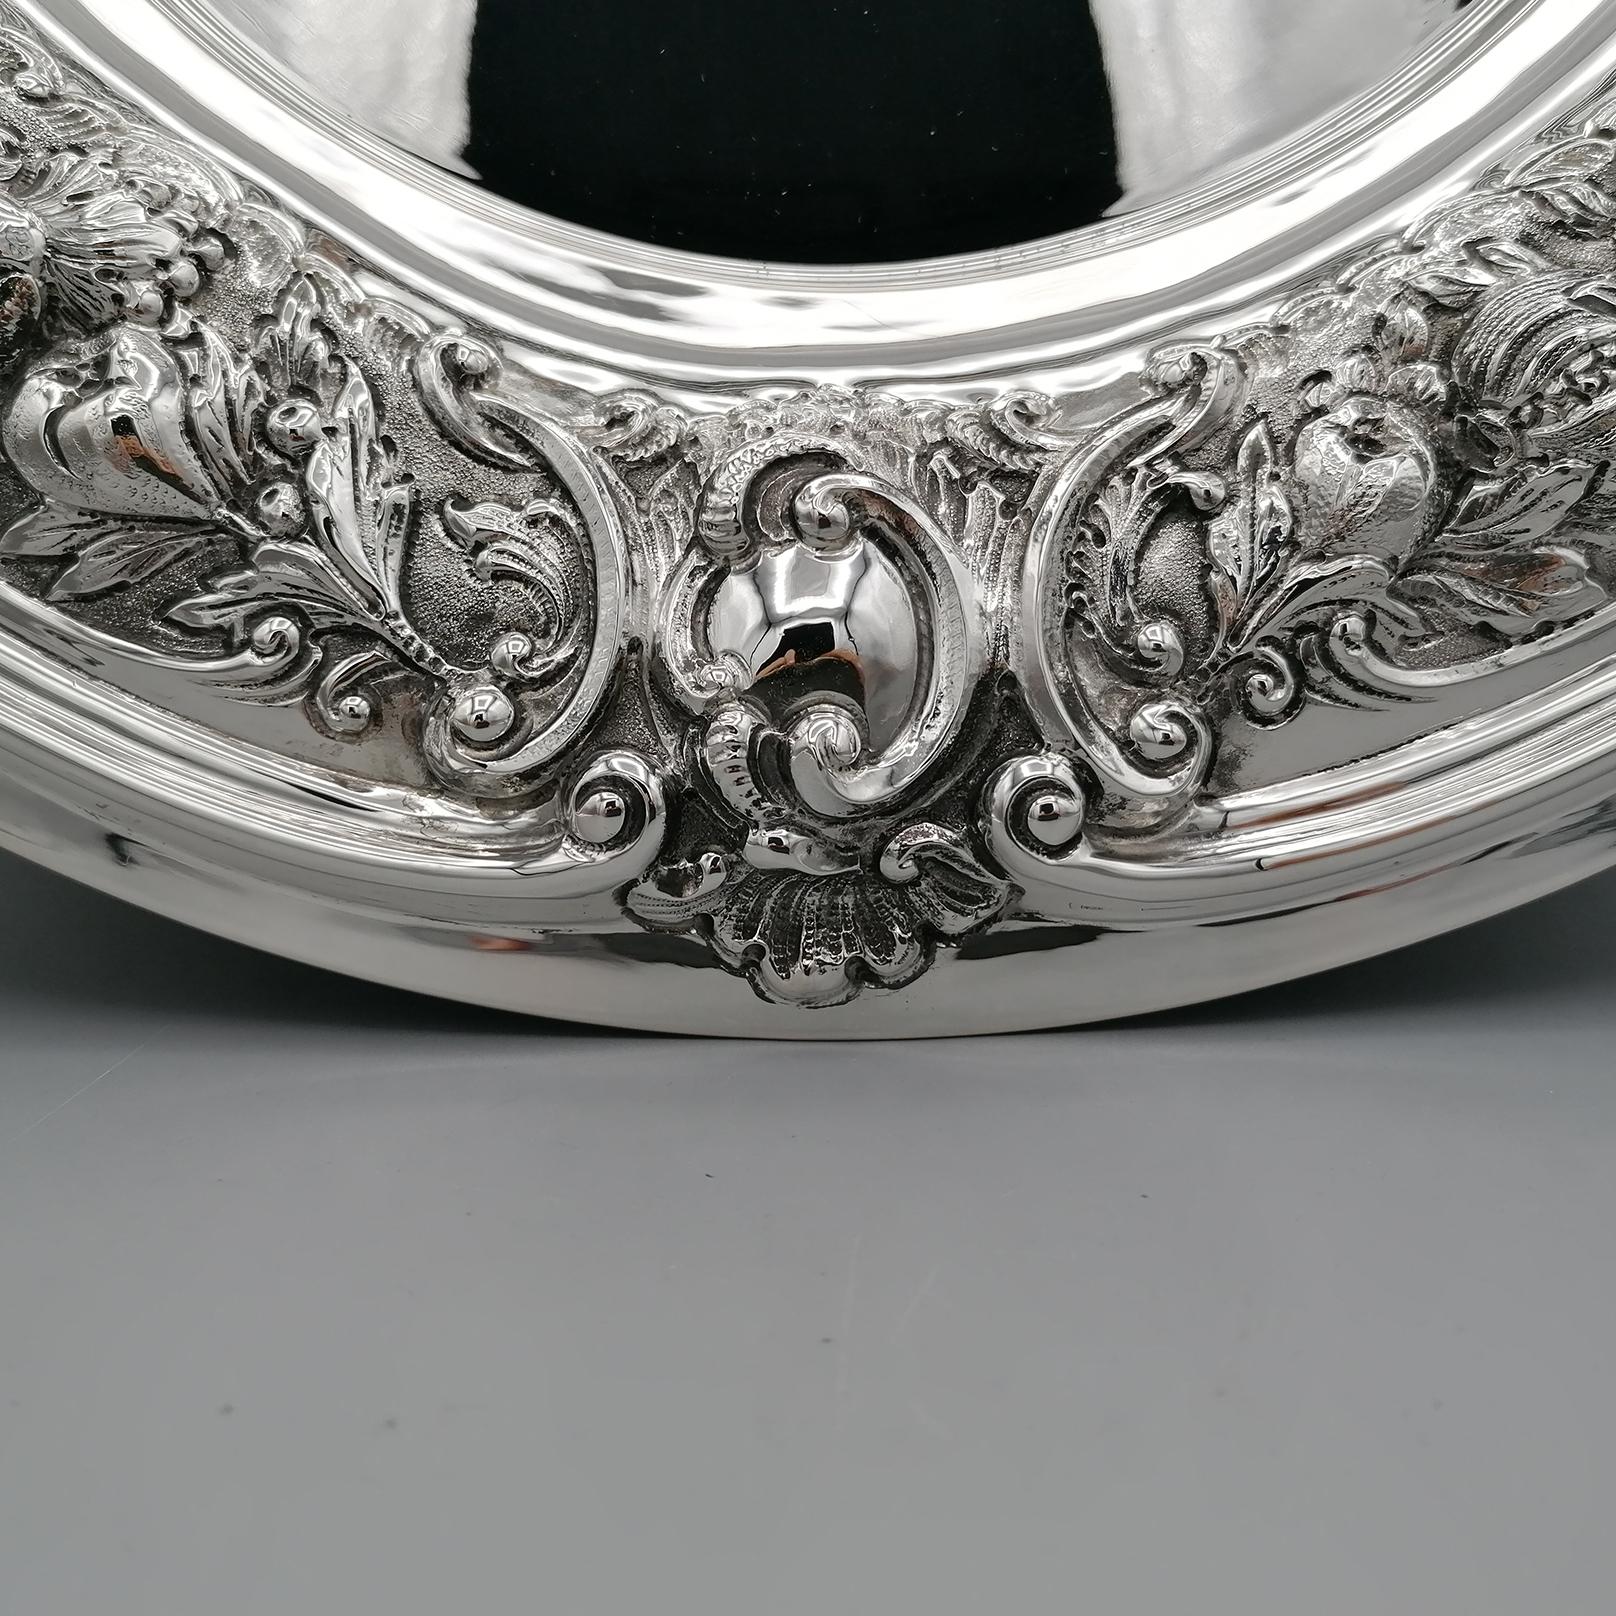 Baroque style centerpiece in 800 solid silver, completely handmade and subsequently embossed and chiseled.
The edge of the centerpiece was embossed with fruit motifs and masks, typical of the Baroque period.
The outer edge and the part of the